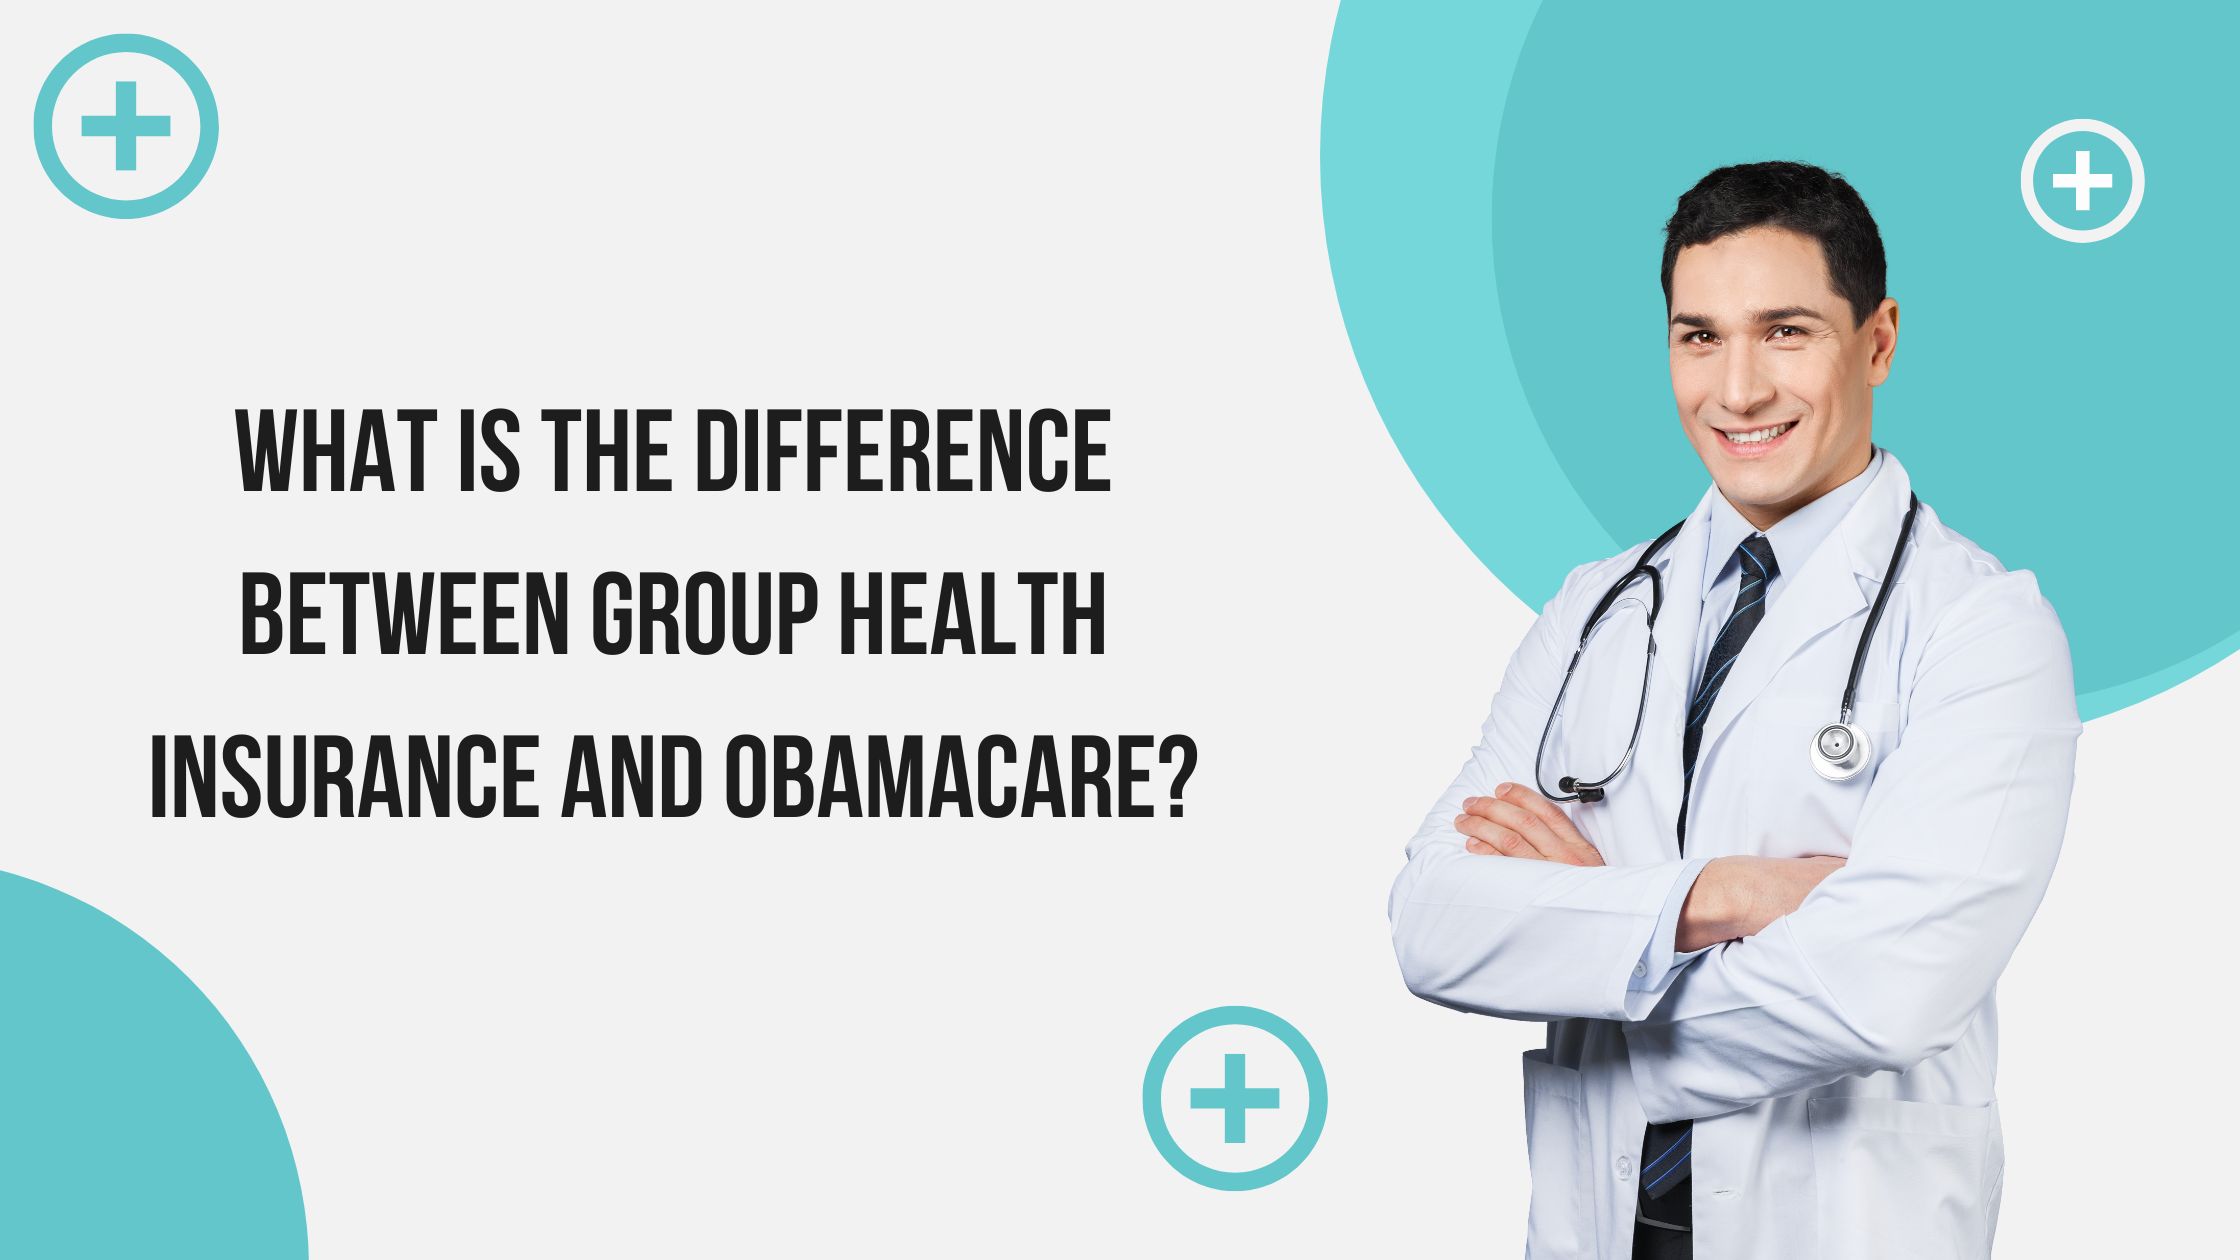 What Is The Difference Between Group Health Insurance And Obamacare